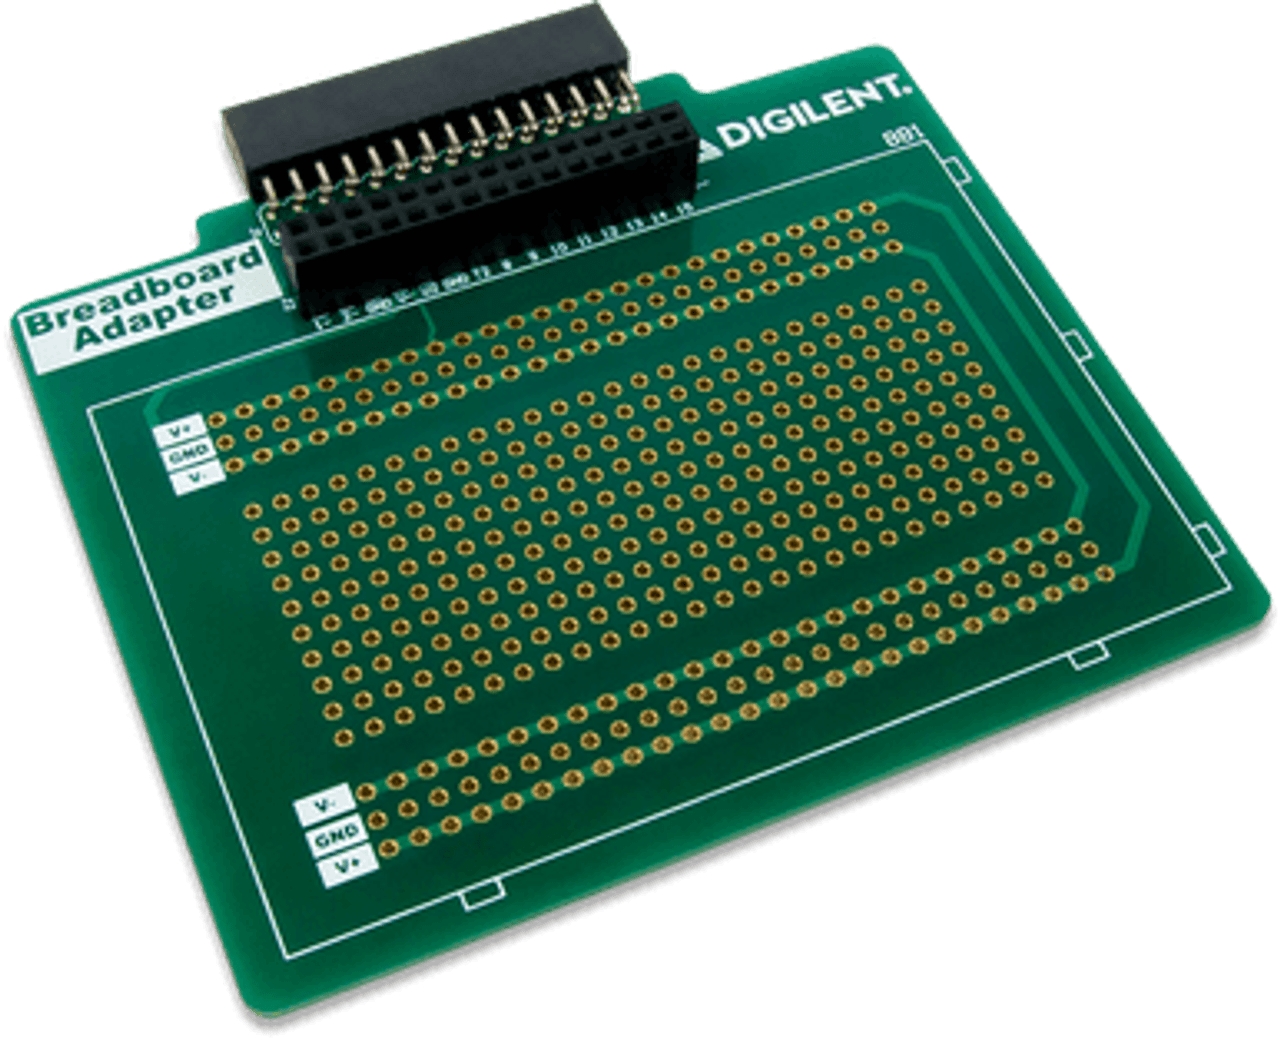 Breadboard Adapter for Analog Discovery - Digilent